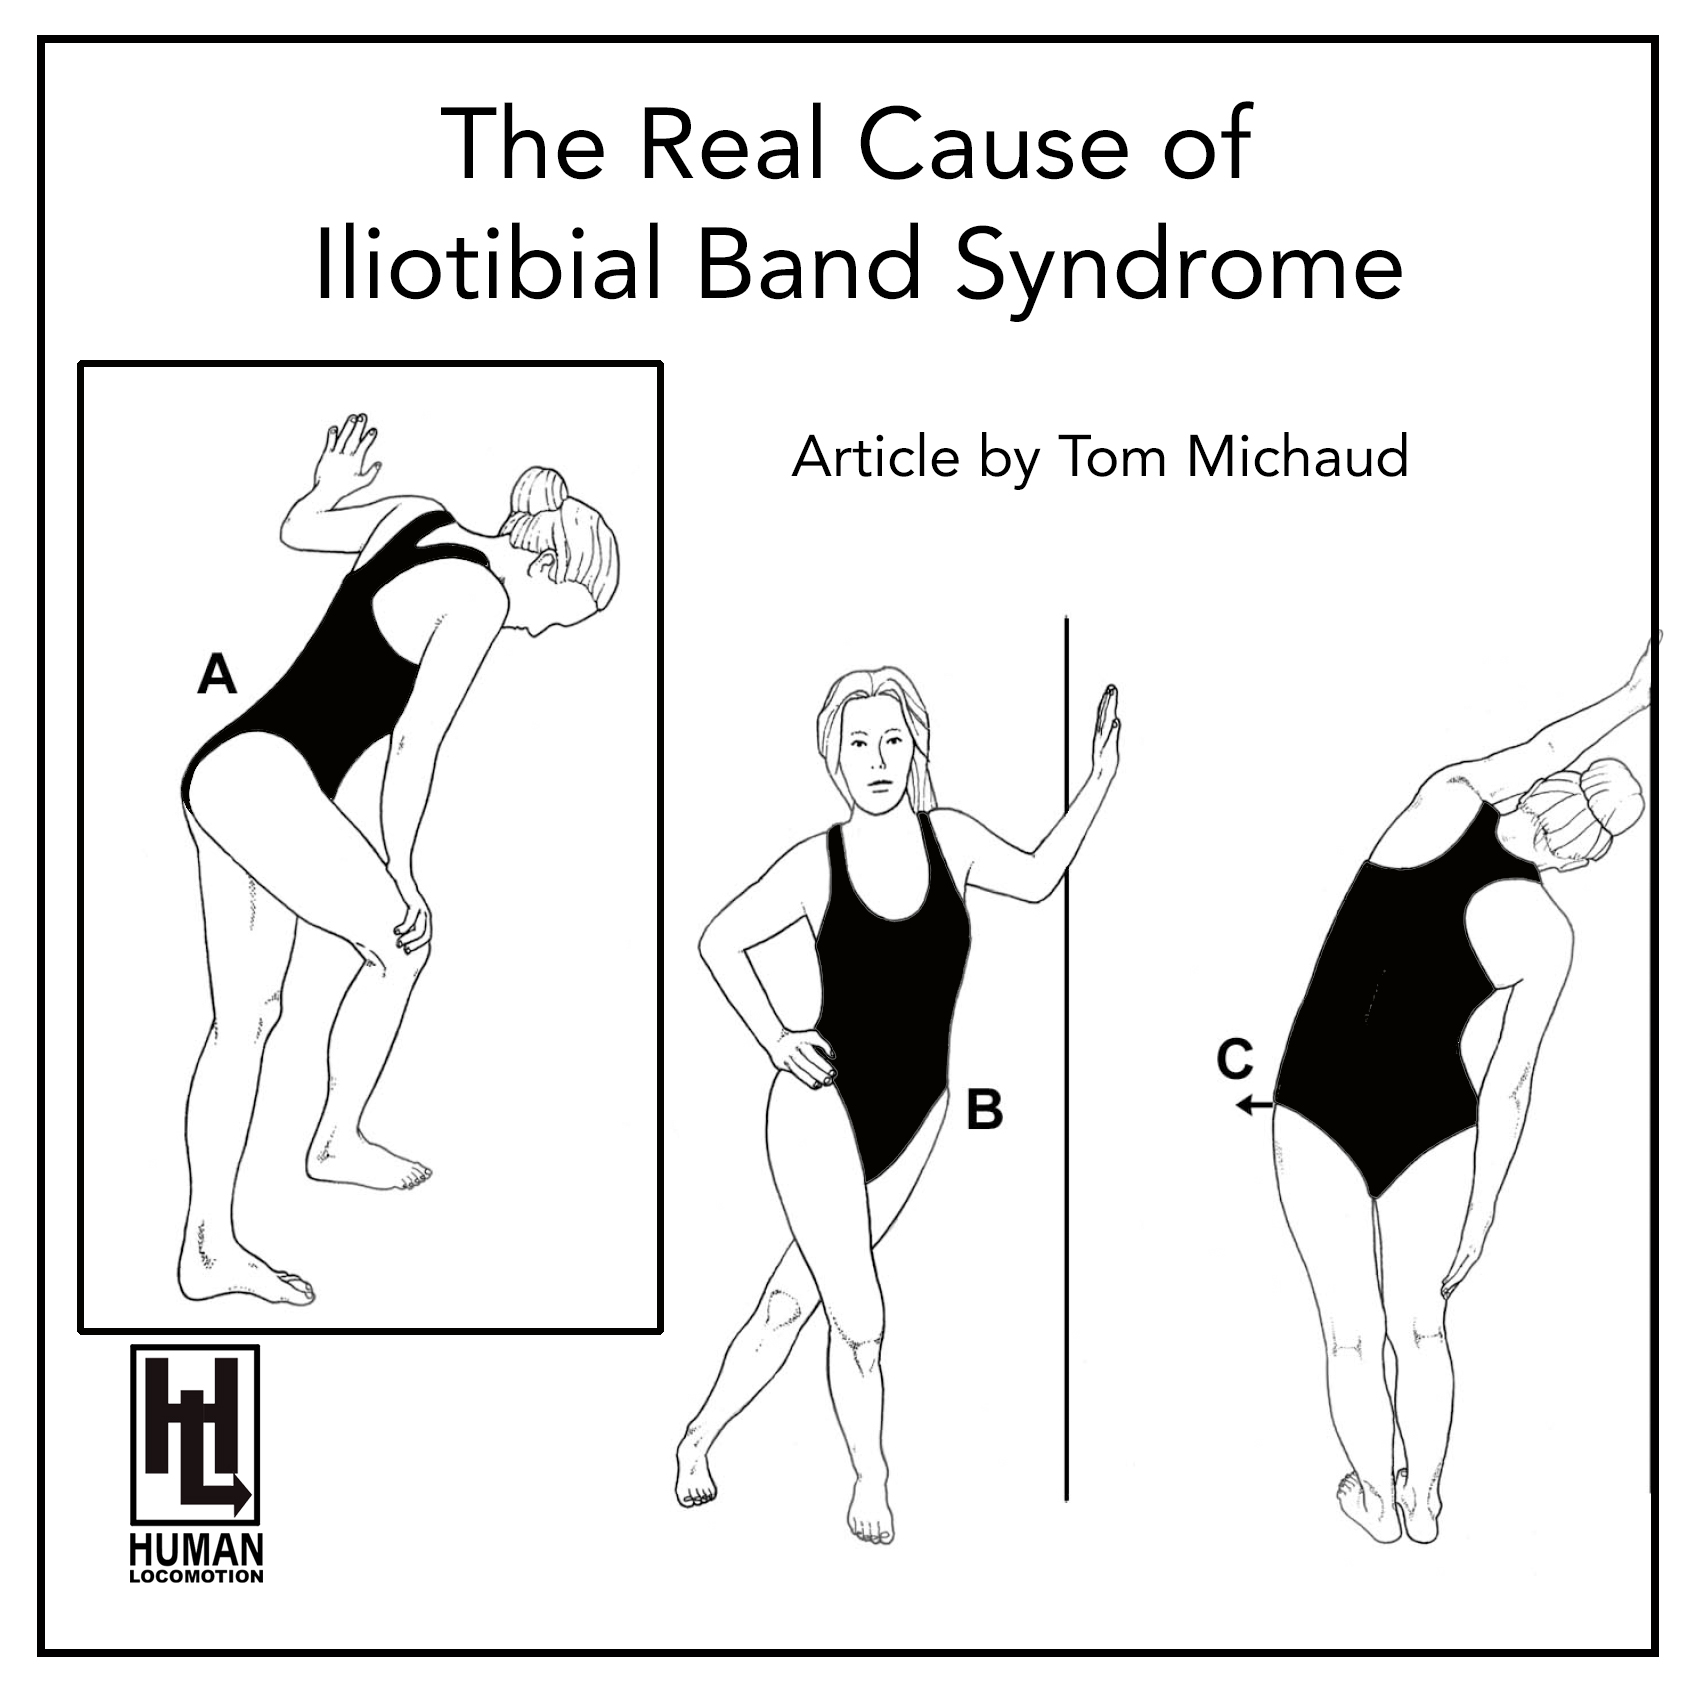 The Real Cause of Iliotibial Band Syndrome